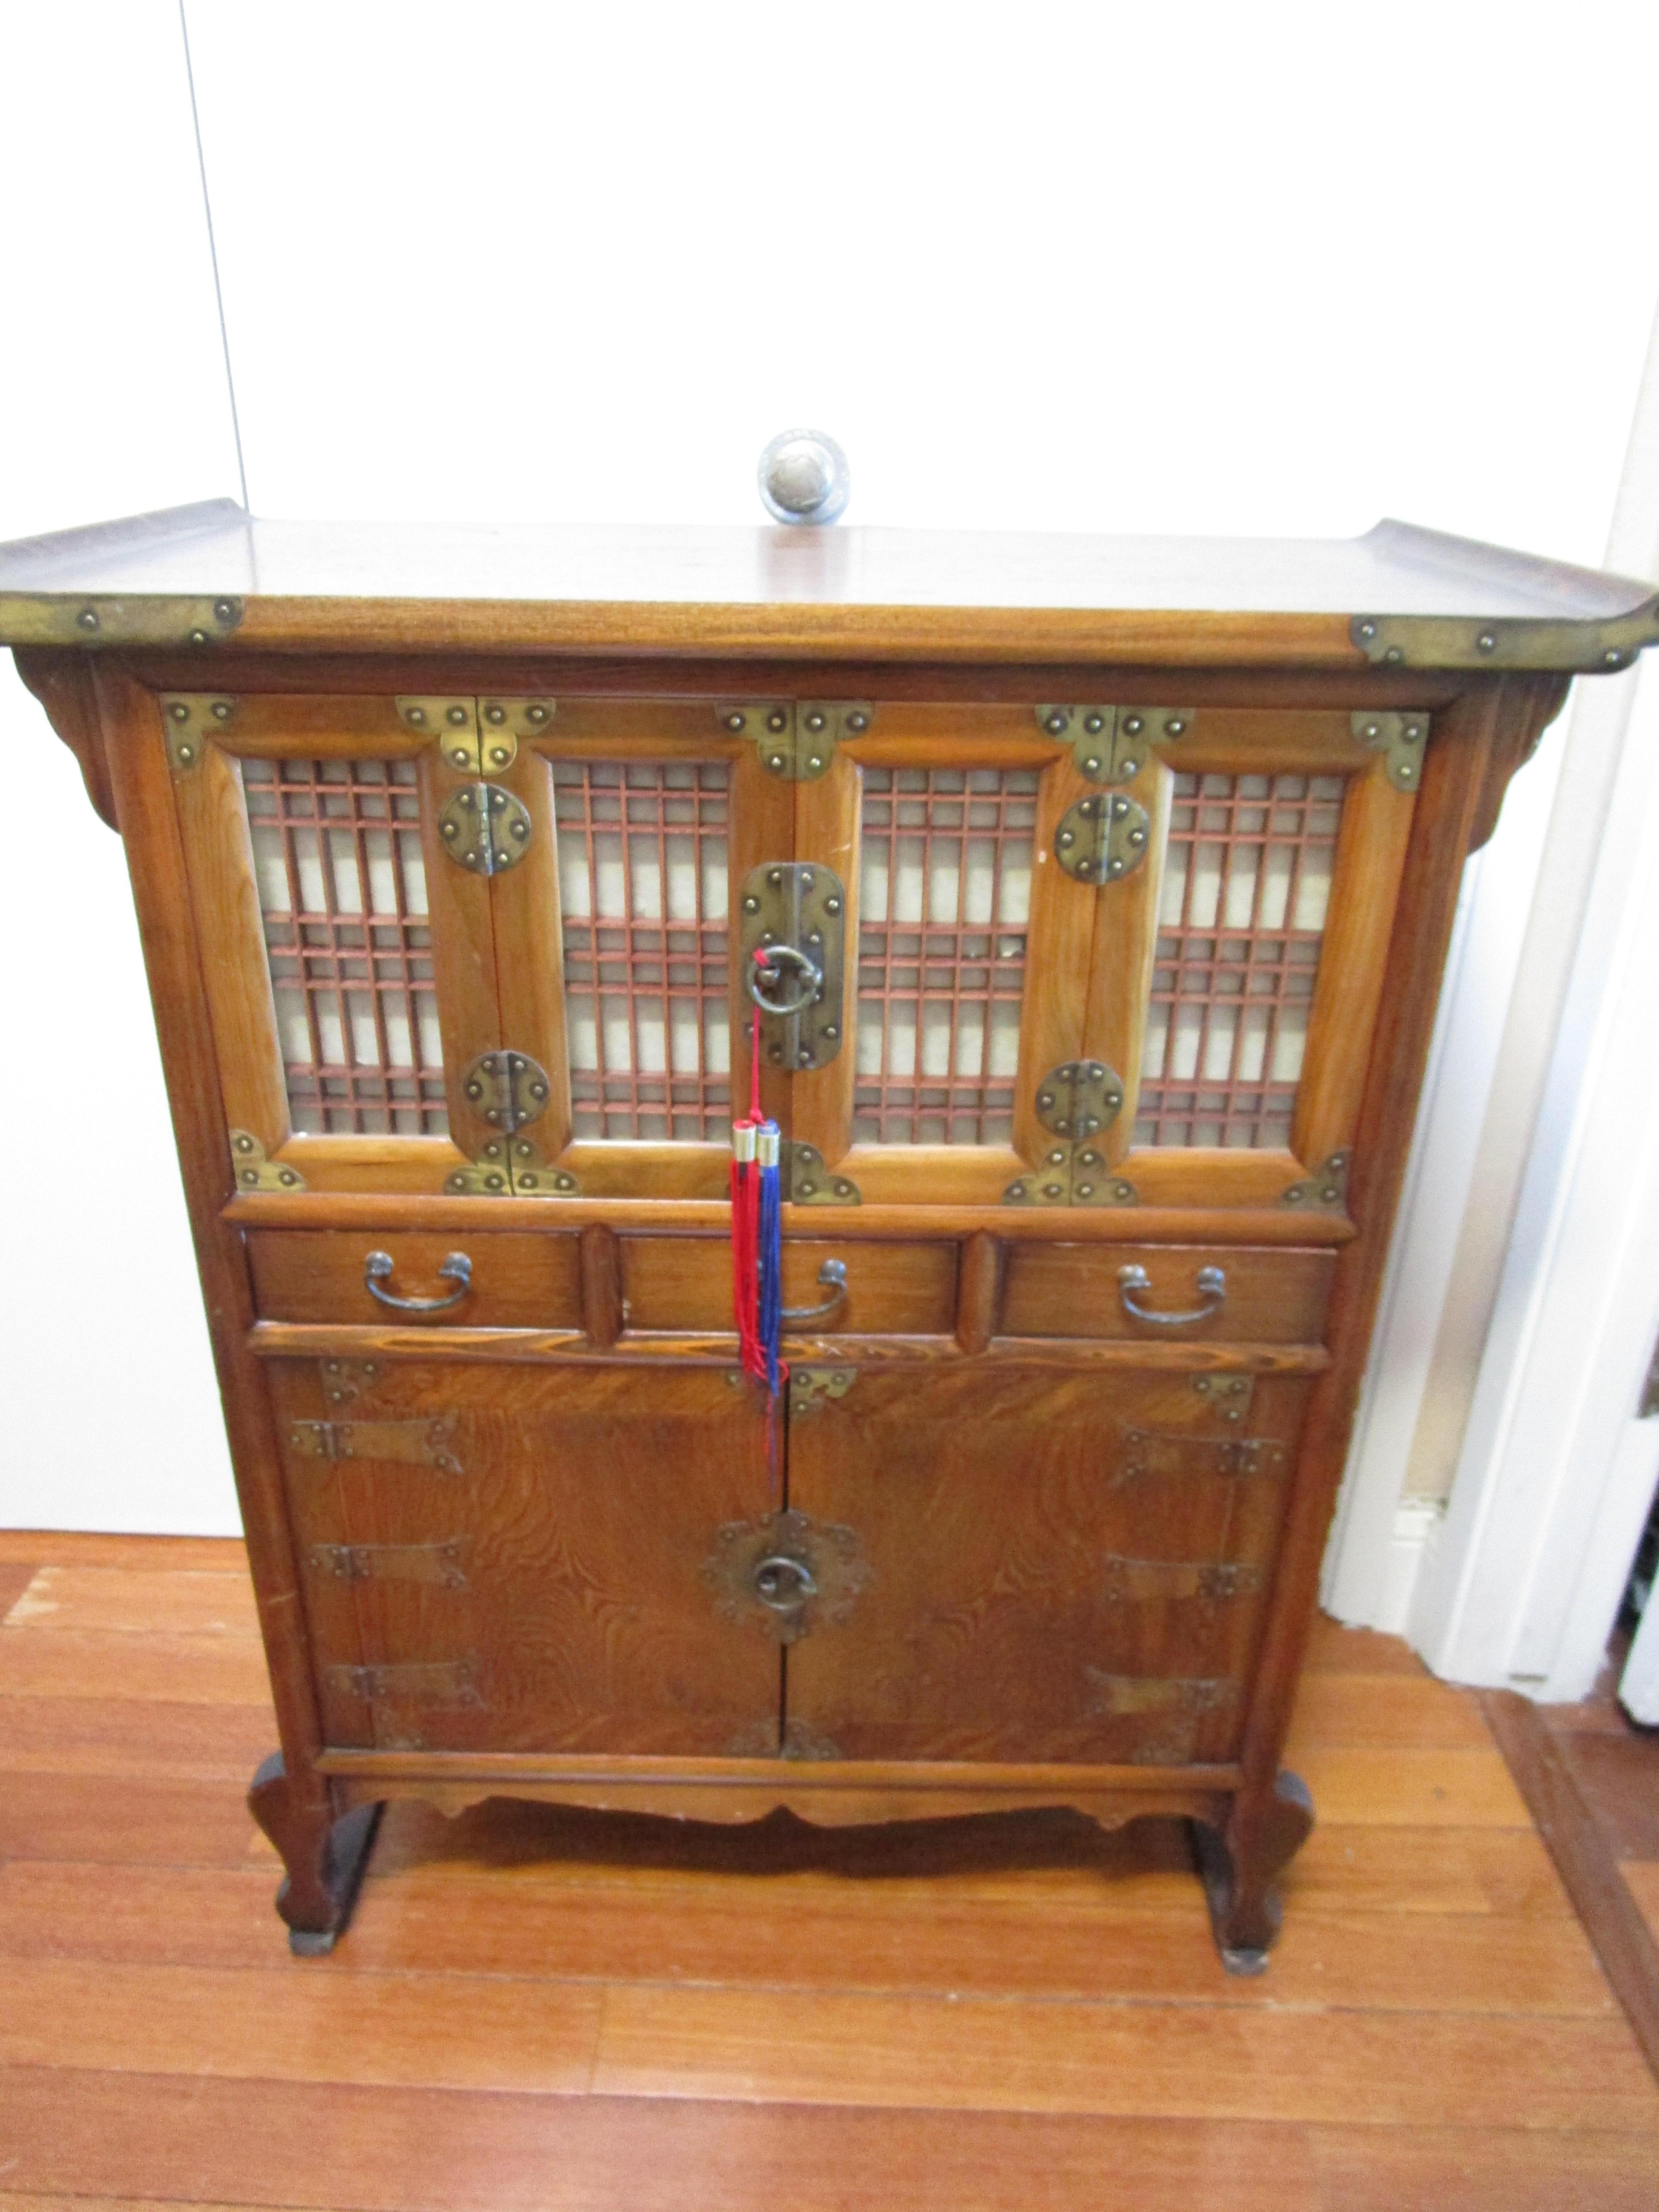 This is a beautiful Korean elm storage cabinet with drawers and wonderful details. The wood has a lovely deep patina. The cabinet has elements all over in brass including the hinges. The top has the familiar up-scrolled ends and the four doors at